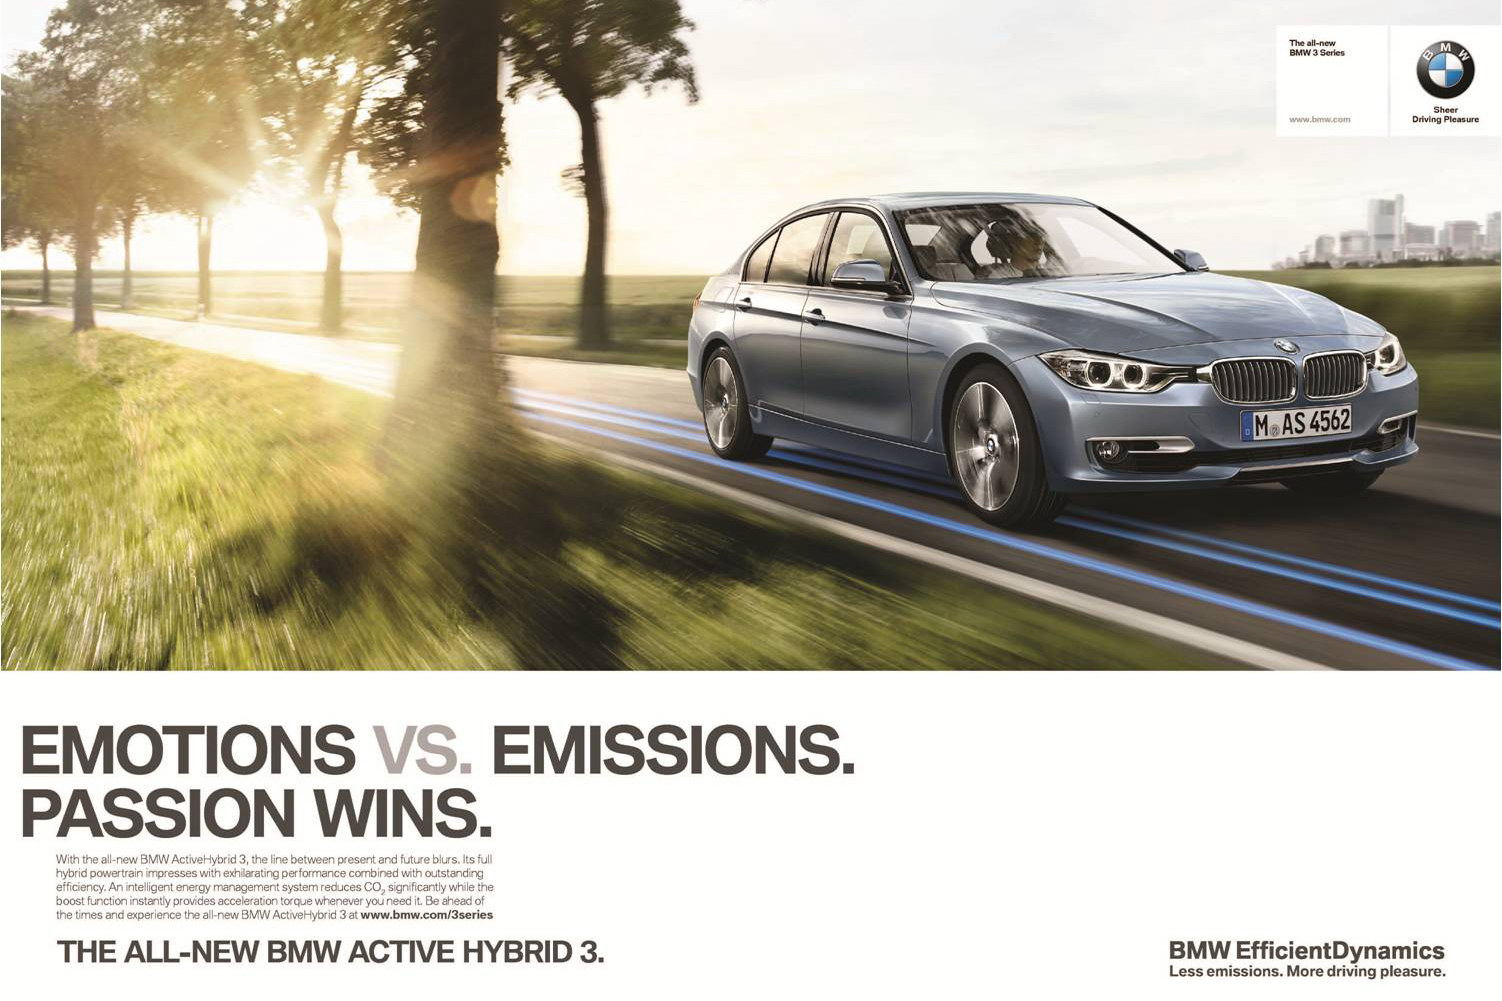 Bmw advertising campaign 2012 #6